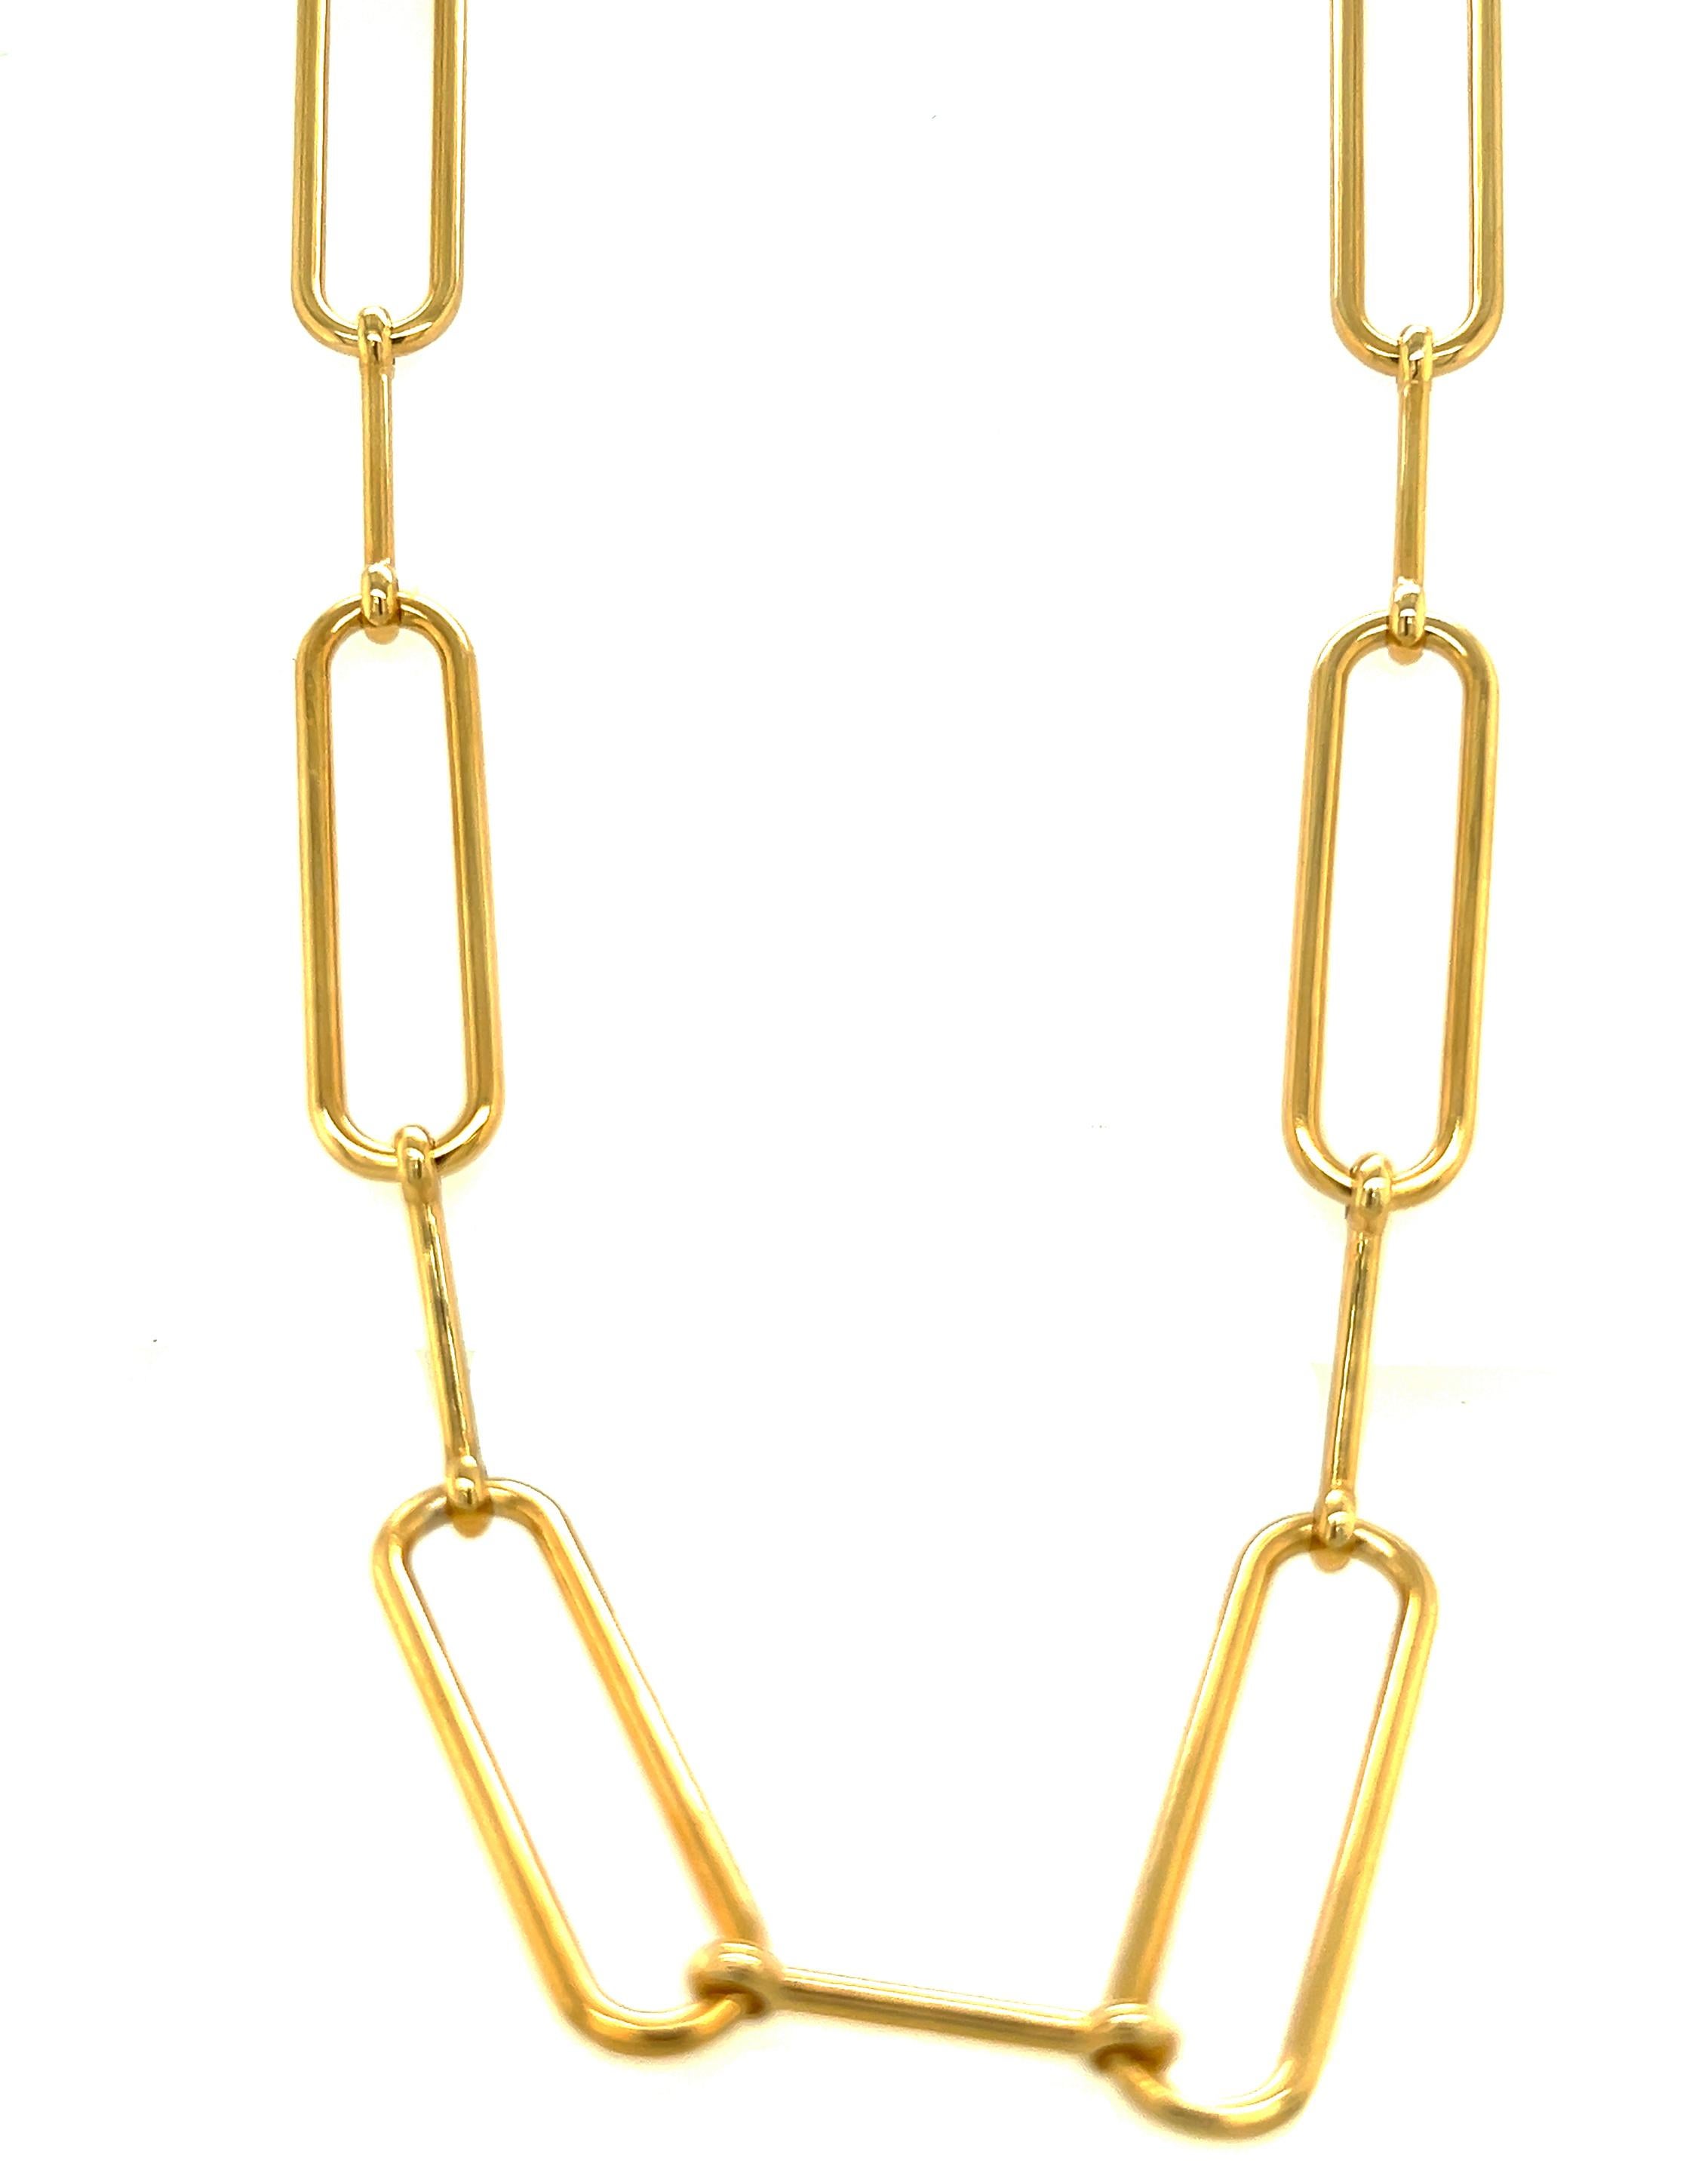 Chic yet Timeless Geometrical Long Chain Necklace composed by rectangular shaped links to create an harmonious, elegant, balanced movement(31.49inches, 80cm), 24.66g, 0.87 Troy Ounces.
This piece is a beautiful example of italian craftsmanship and